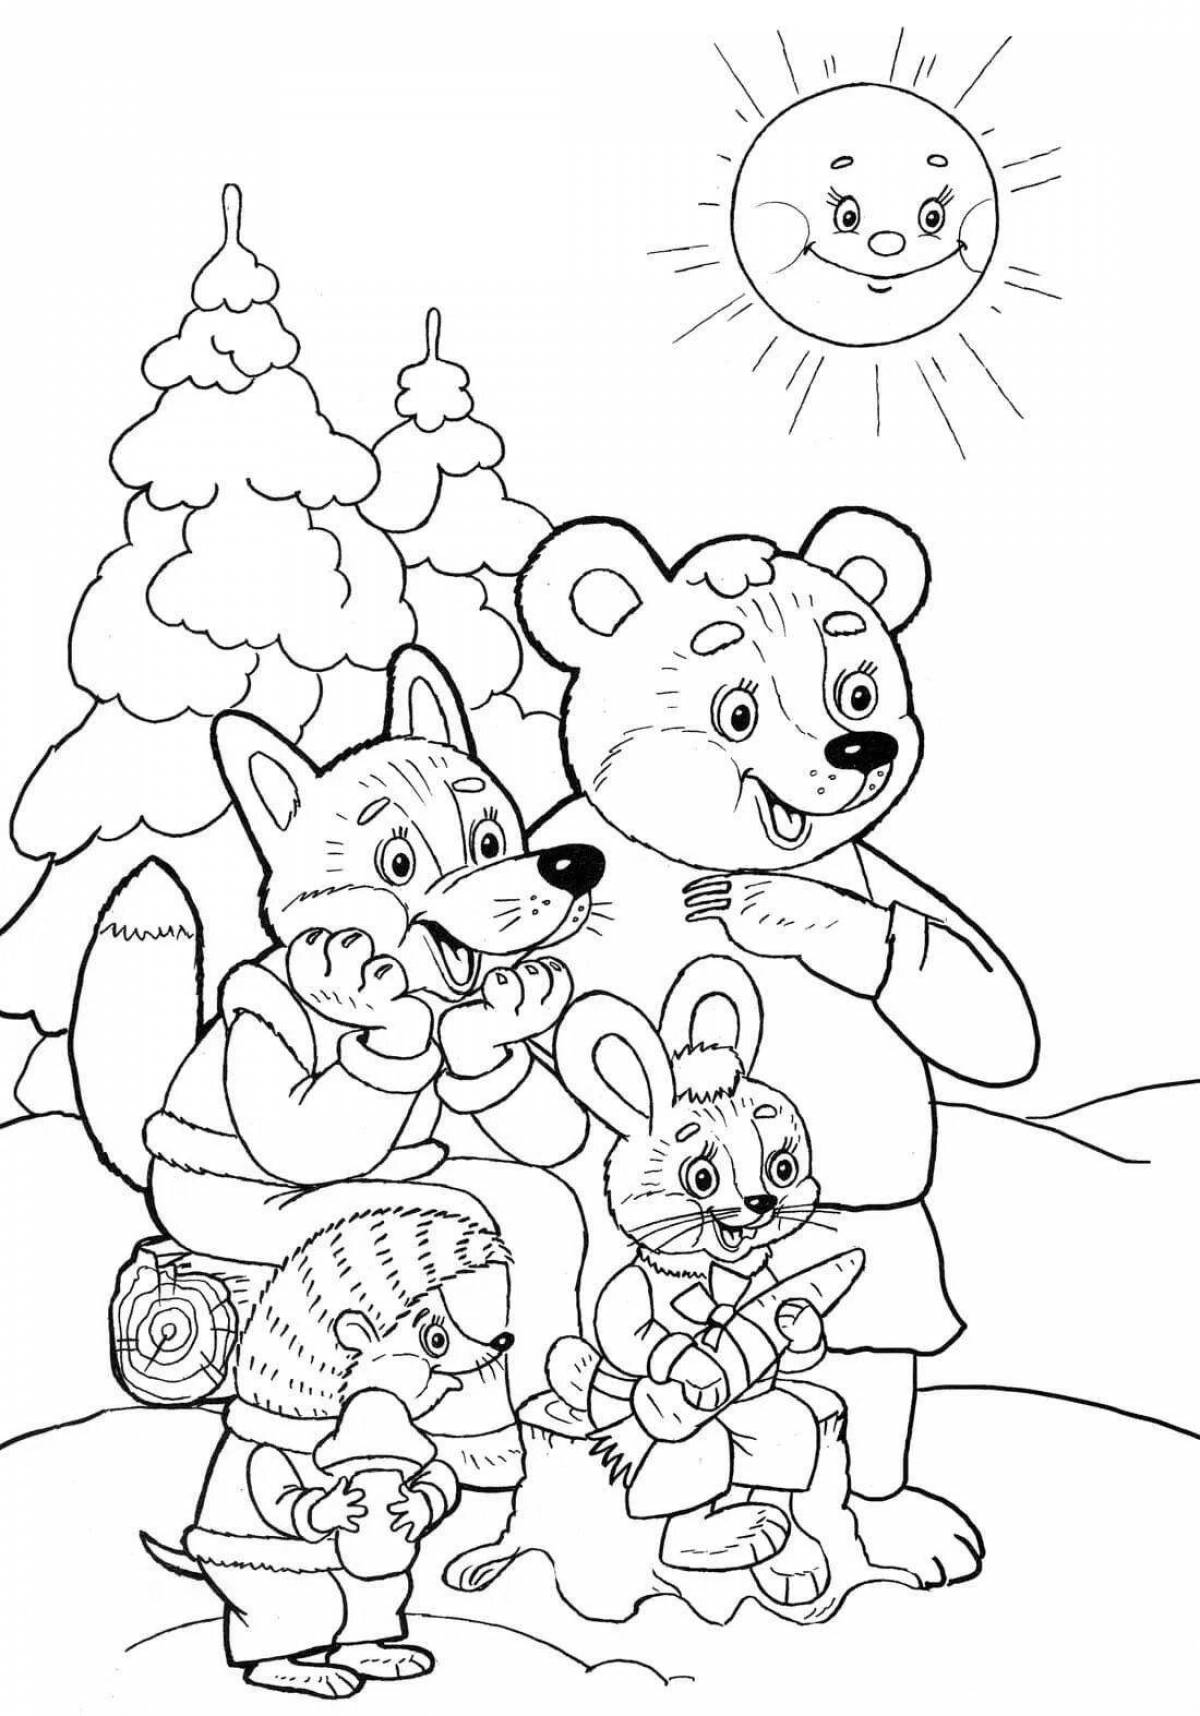 Fine bear and hare coloring page